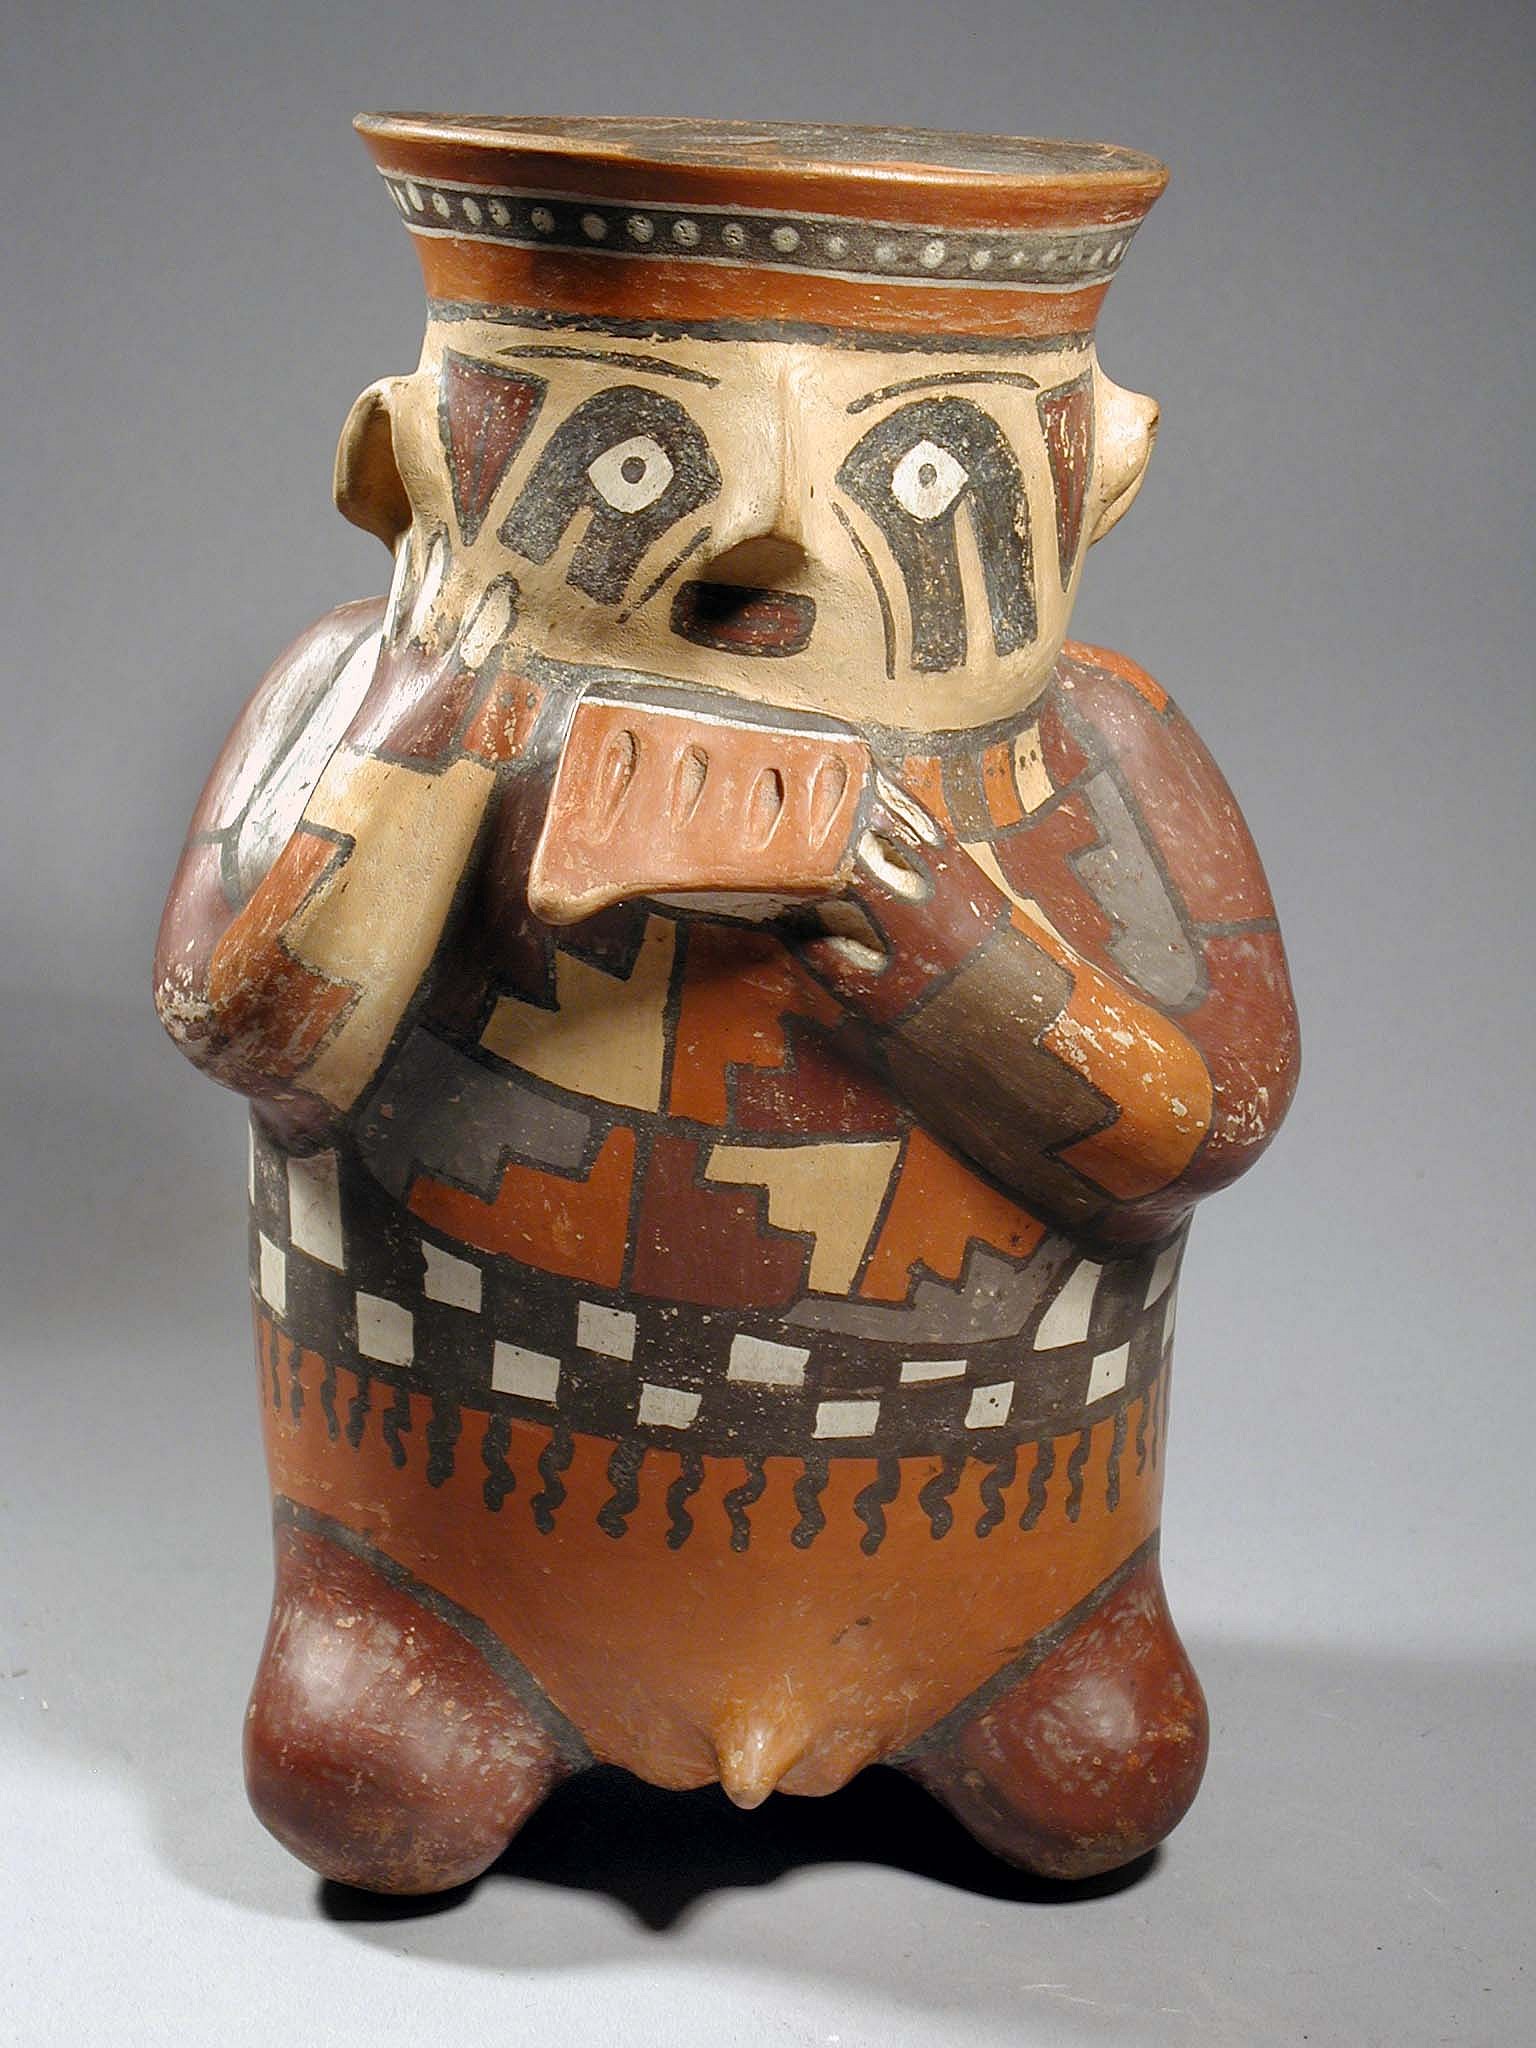 Peru, Nazca Polychrome Effigy Jar with Flute Player
This is one of the few effigy figures in the Nazca ceramic sequence that portrays a musician. The figure is holding a five chambered panpipe in his right hand and has his left hand to his cheek. He is elaborately dressed in patchwork tunic, with a black and white checkered undergarment. Around his neck is a series of plaques in alternating colors of beige, brown and gray. On top of his head is a polka dot band in grey. Below he is wearing a red/brown loin cloth covering prominent genitals. The musician has facial decoration, including black condor profile heads around the eyes and red triangles in front of his ears. This figure is illustrated by Lavalle "Nazca"  (1986: 132).
Media: Ceramic
Dimensions: Height 9 1/2"
$14,000
M3015